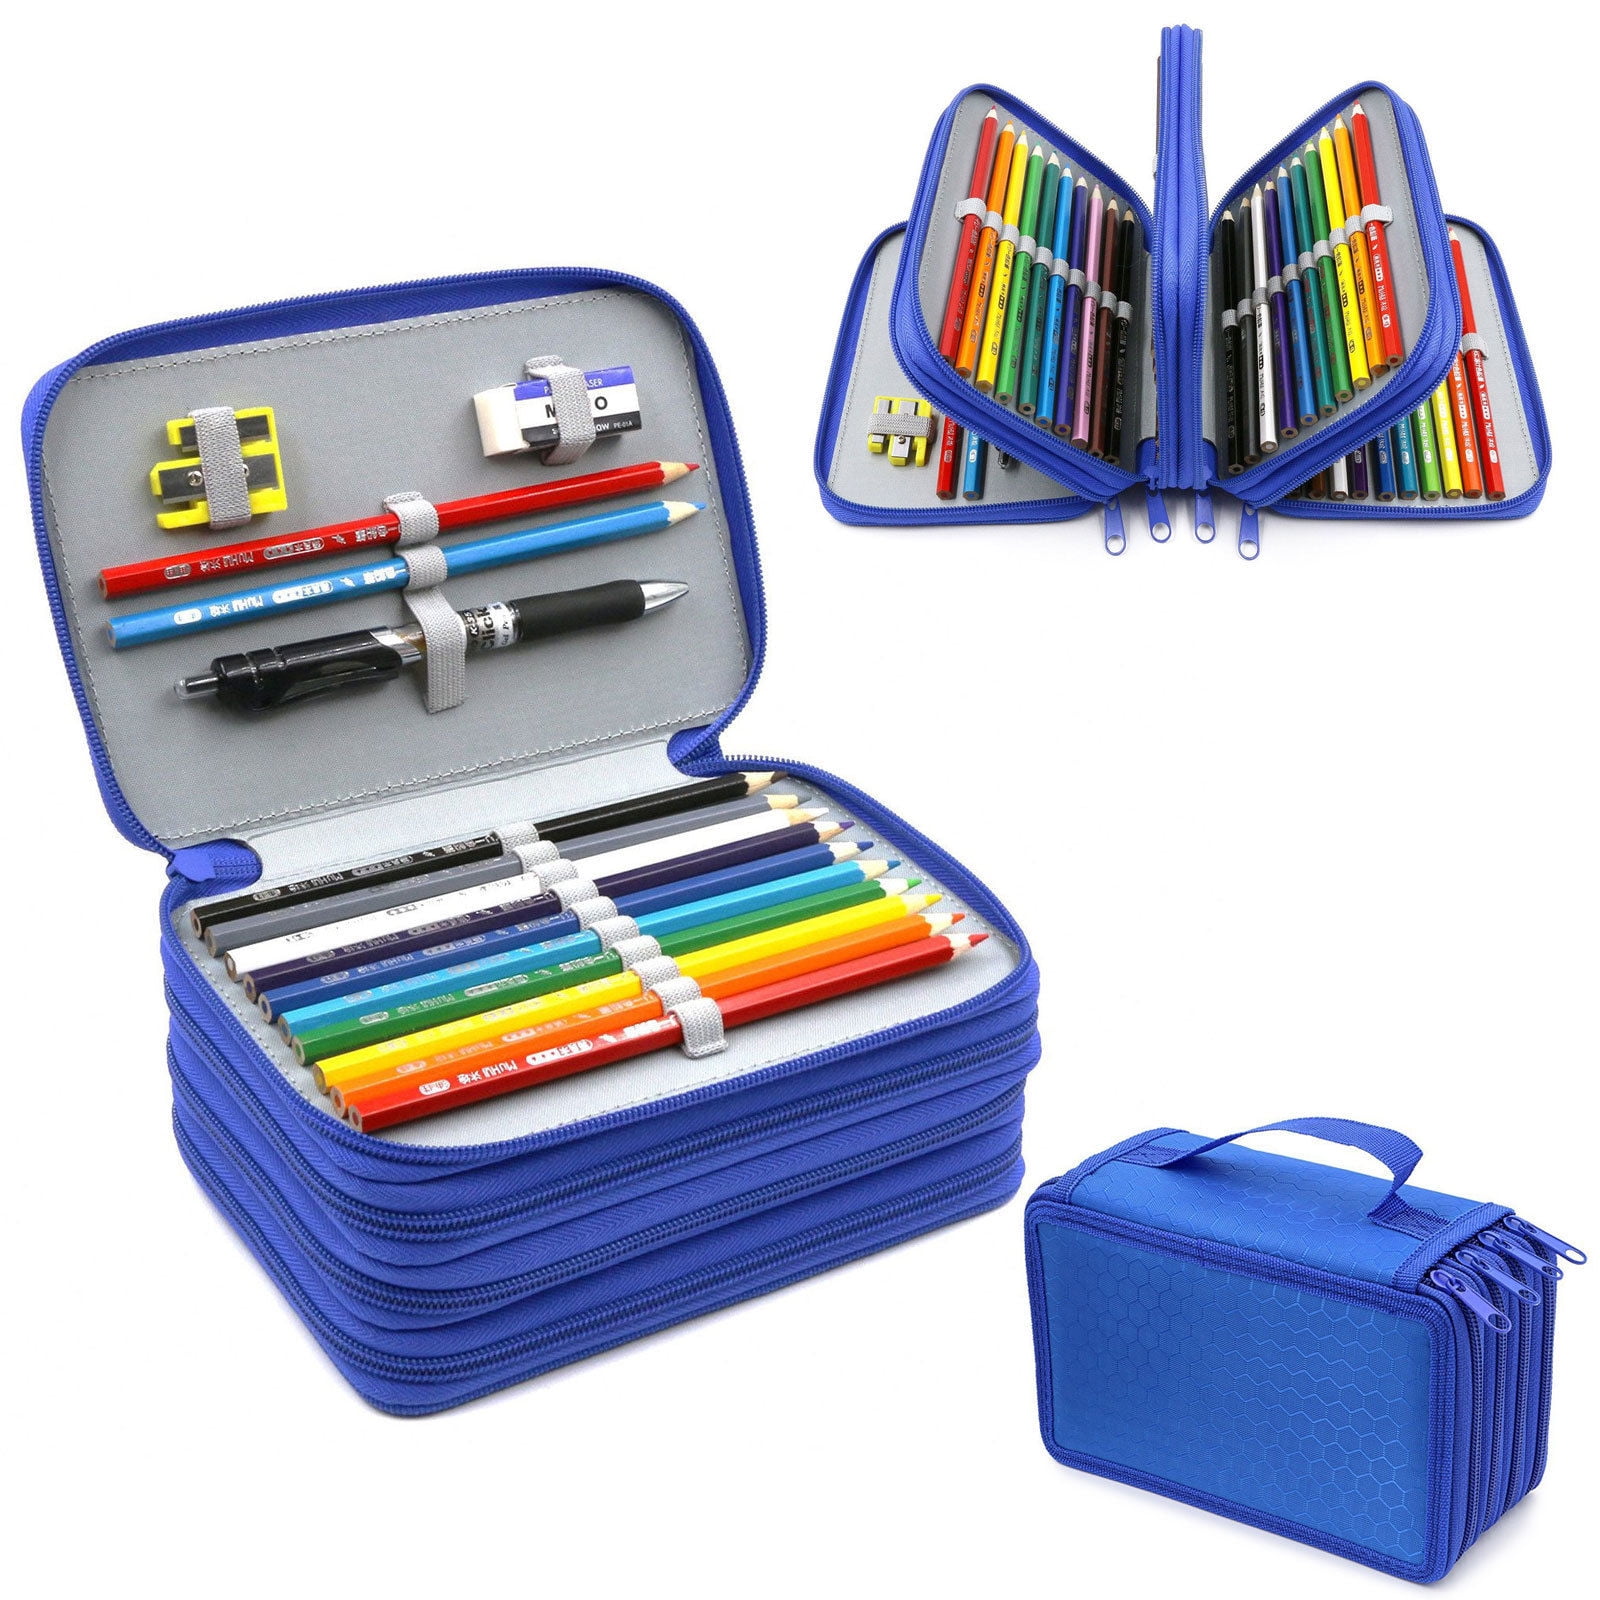 Rolling Wood Pencil Box Kit, Woodworking Kit for Kids, Educational